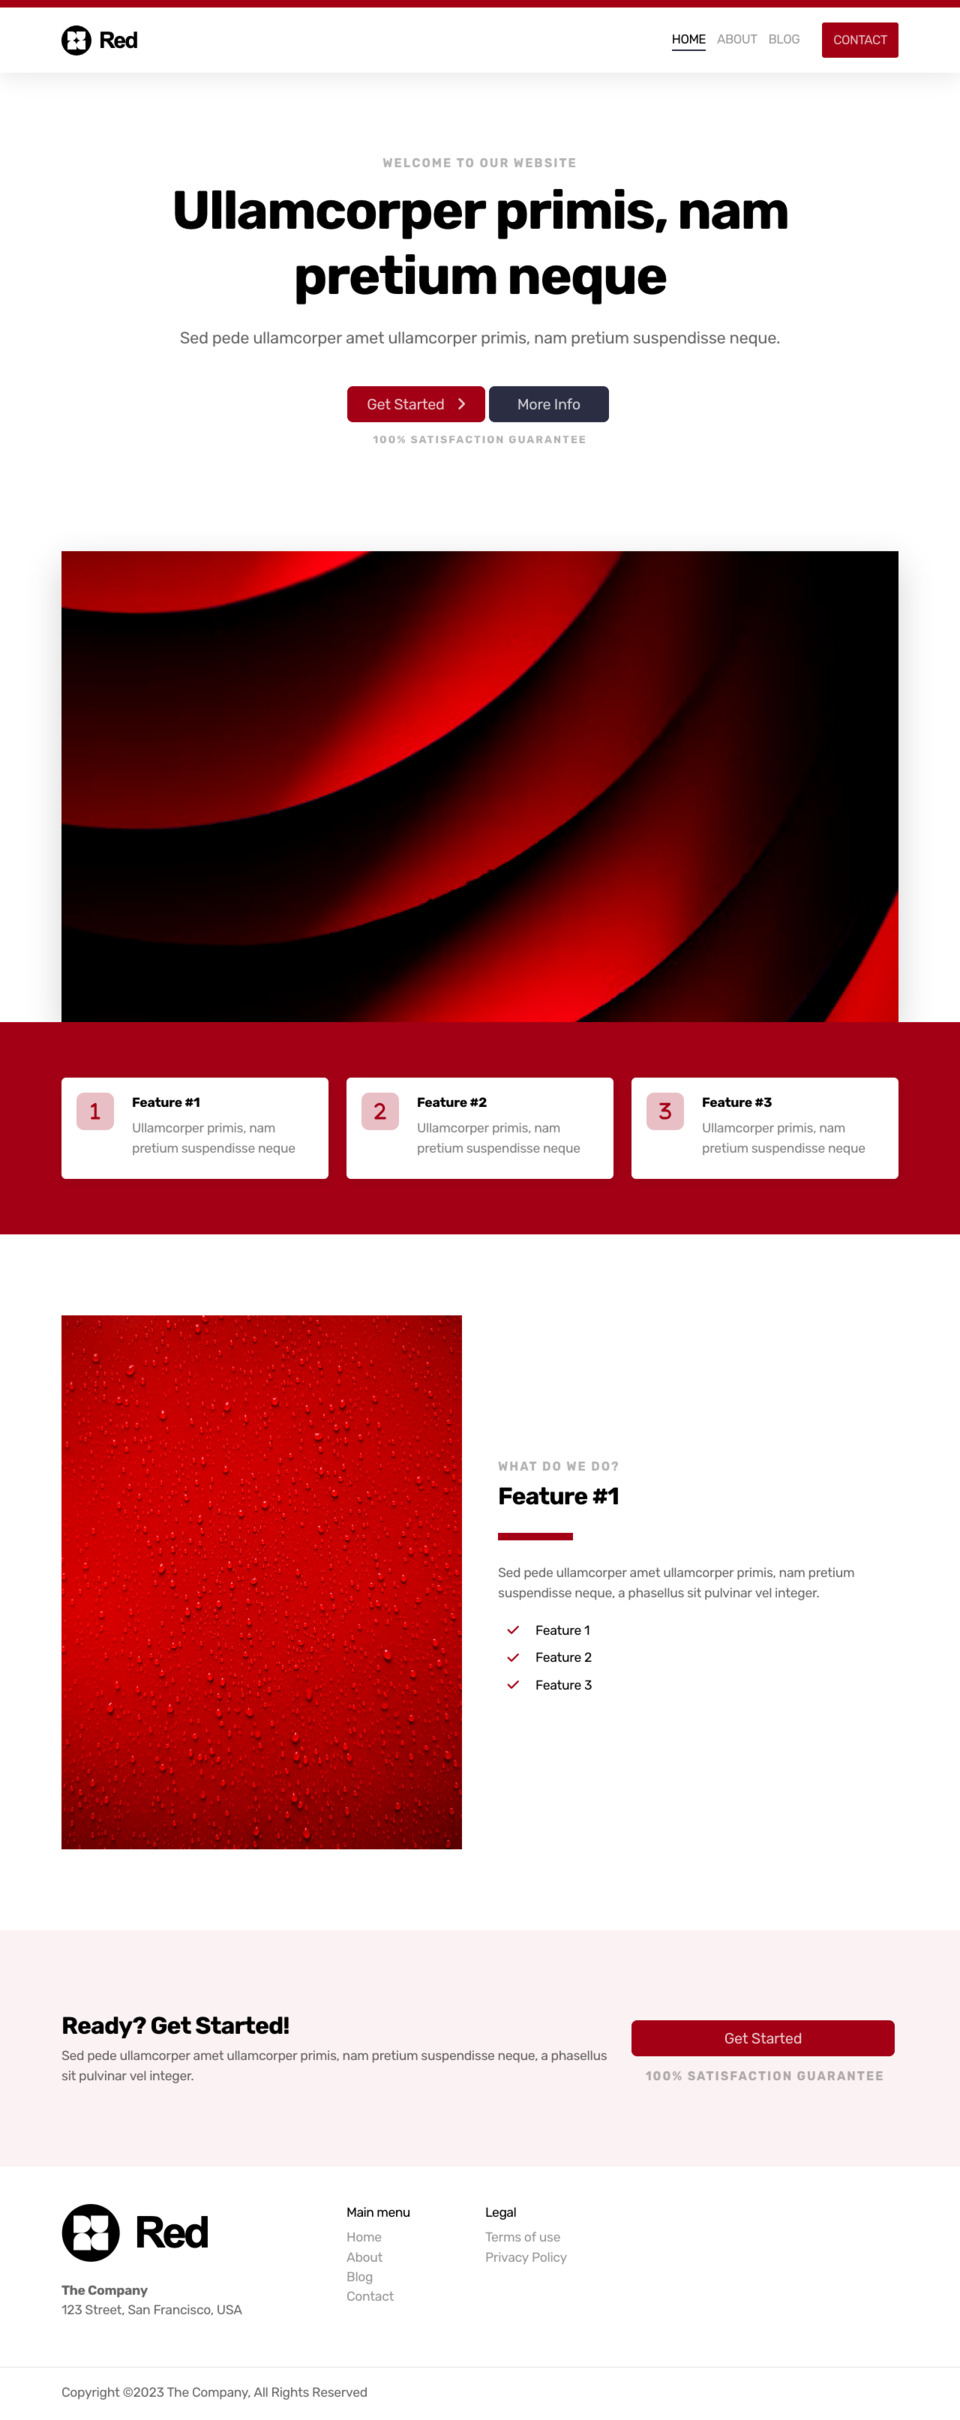 Red Website Template - Ideal for businesses looking for a vibrant and passionate online presence.